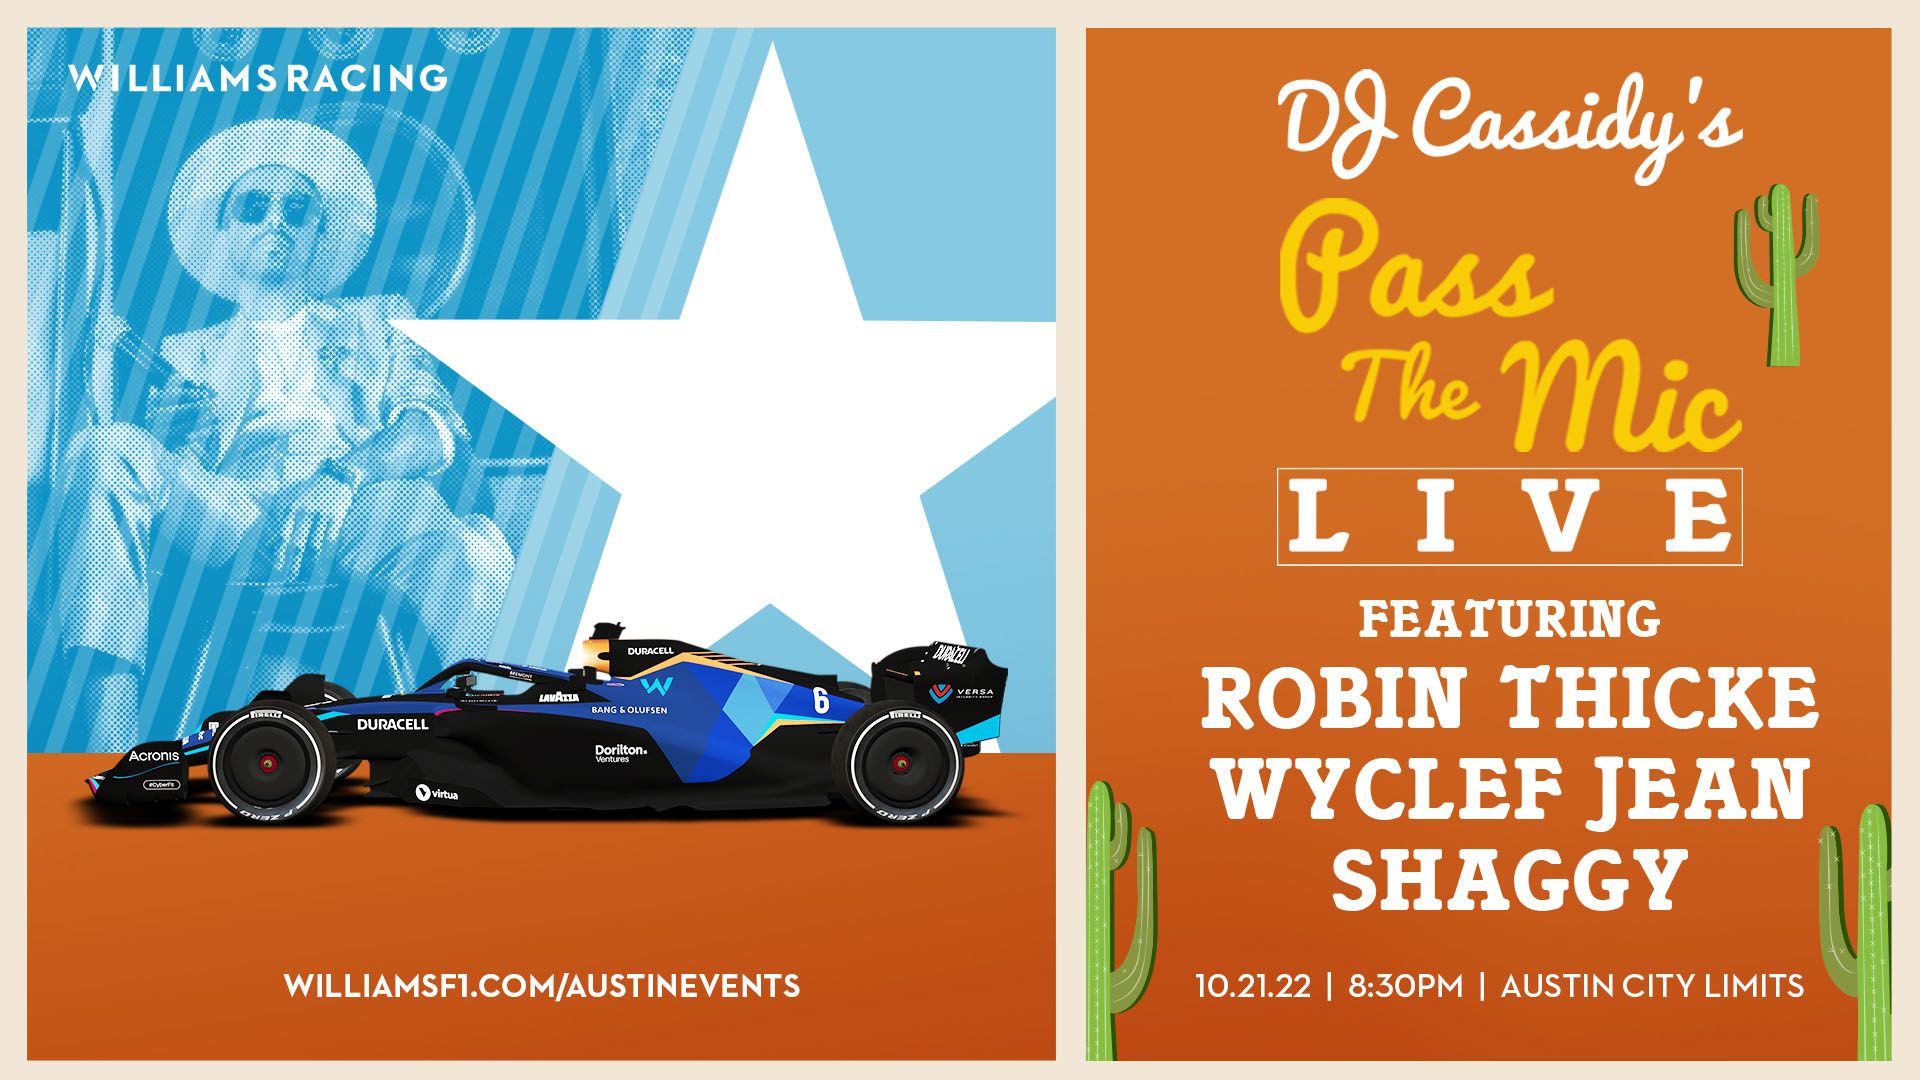 Competition Win 4 tickets to DJ Cassidys Pass the Mic Live in Austin Williams Racing